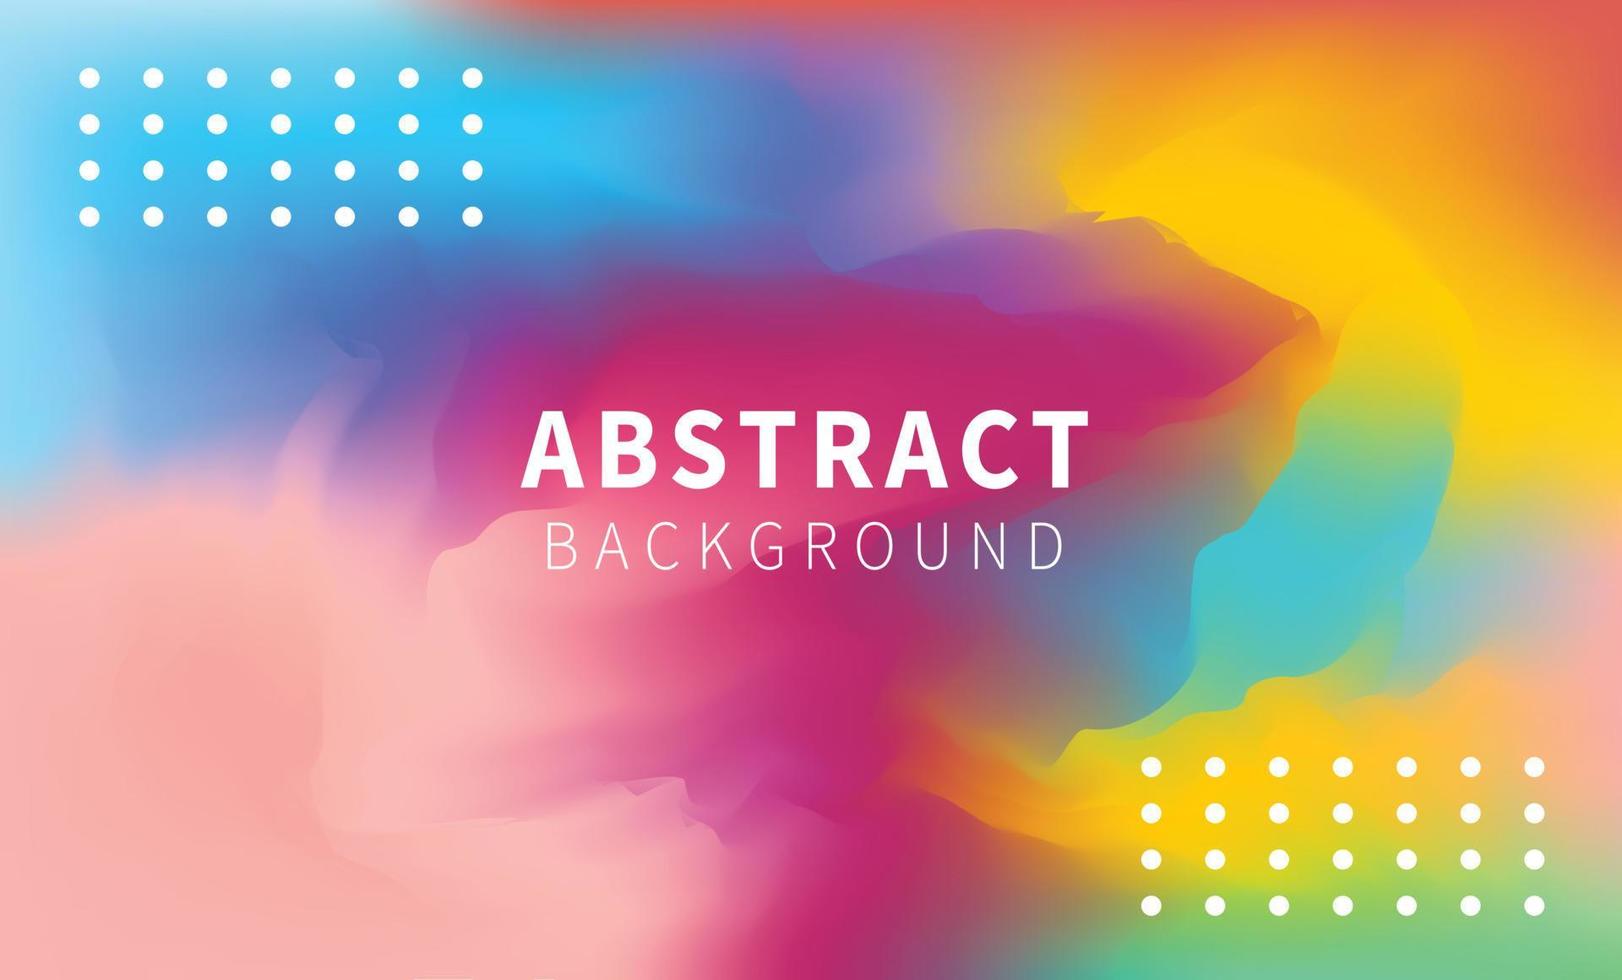 Blured Abstract Gradient Background vector